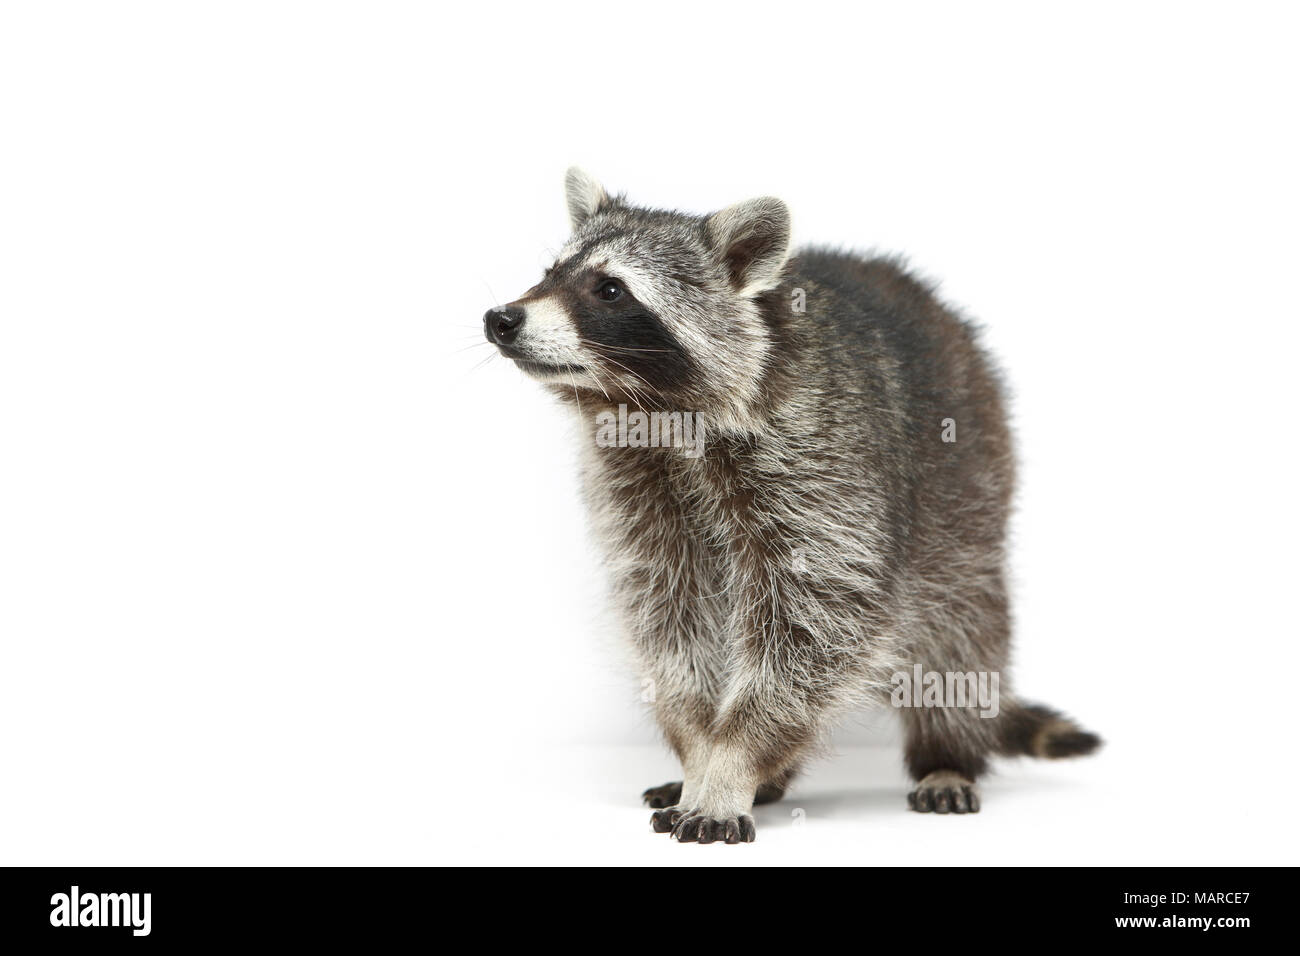 Raccoon (Procyon lotor). Adult standing, seen head-on. Studio picture against a white background. Germany Stock Photo